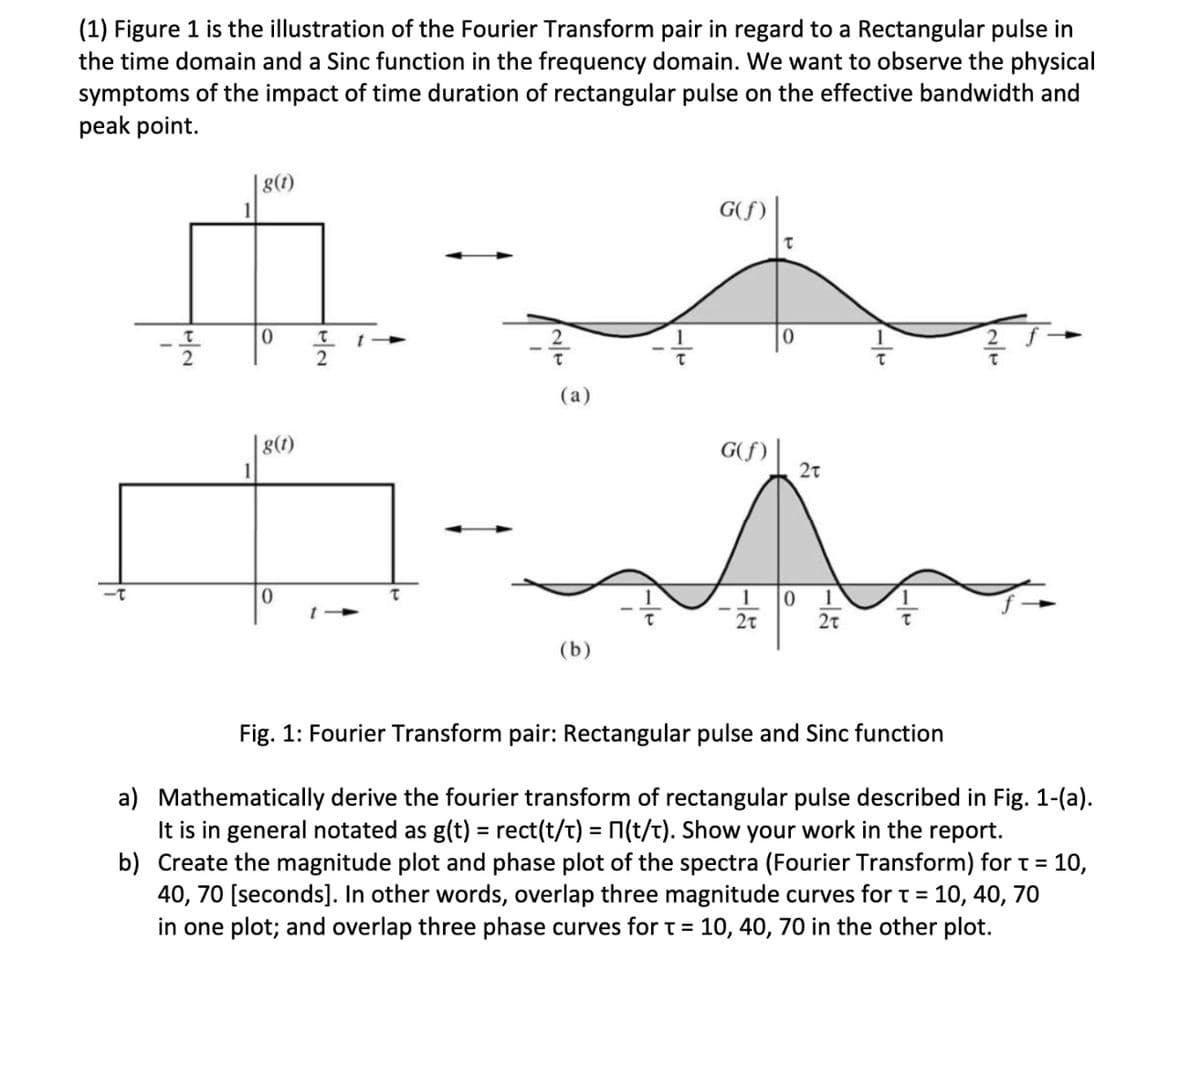 (1) Figure 1 is the illustration of the Fourier Transform pair in regard to a Rectangular pulse in
the time domain and a Sinc function in the frequency domain. We want to observe the physical
symptoms of the impact of time duration of rectangular pulse on the effective bandwidth and
peak point.
72
G(f)
τ
0
12
τ t
(a)
1
g(t)
G(f)
Στ
0
-125
2t
-25
0 1
Fig. 1: Fourier Transform pair: Rectangular pulse and Sinc function
a) Mathematically derive the fourier transform of rectangular pulse described in Fig. 1-(a).
It is in general notated as g(t) = rect(t/t) = П(t/t). Show your work in the report.
b) Create the magnitude plot and phase plot of the spectra (Fourier Transform) for t = 10,
40, 70 [seconds]. In other words, overlap three magnitude curves for t = 10, 40, 70
in one plot; and overlap three phase curves for t = 10, 40, 70 in the other plot.